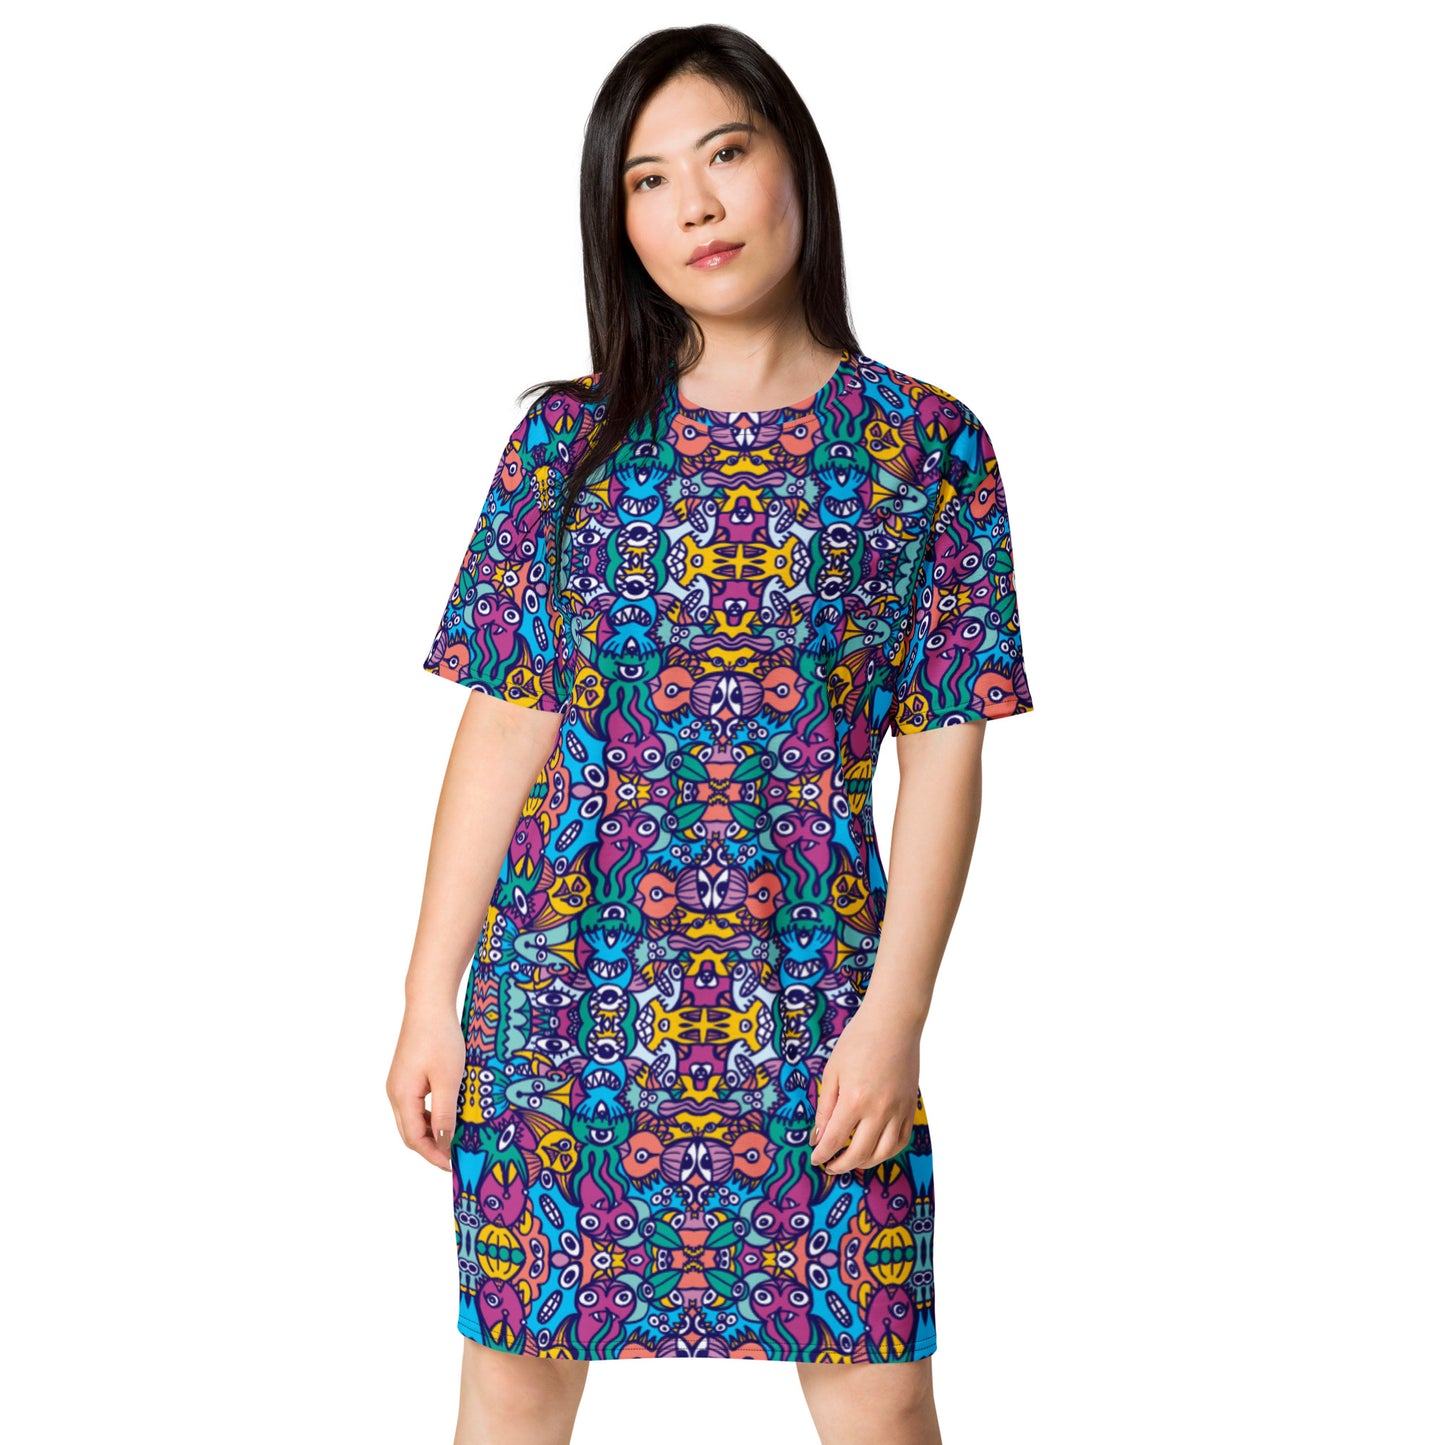 Whimsical design featuring multicolor critters from another world T-shirt dress. Front view